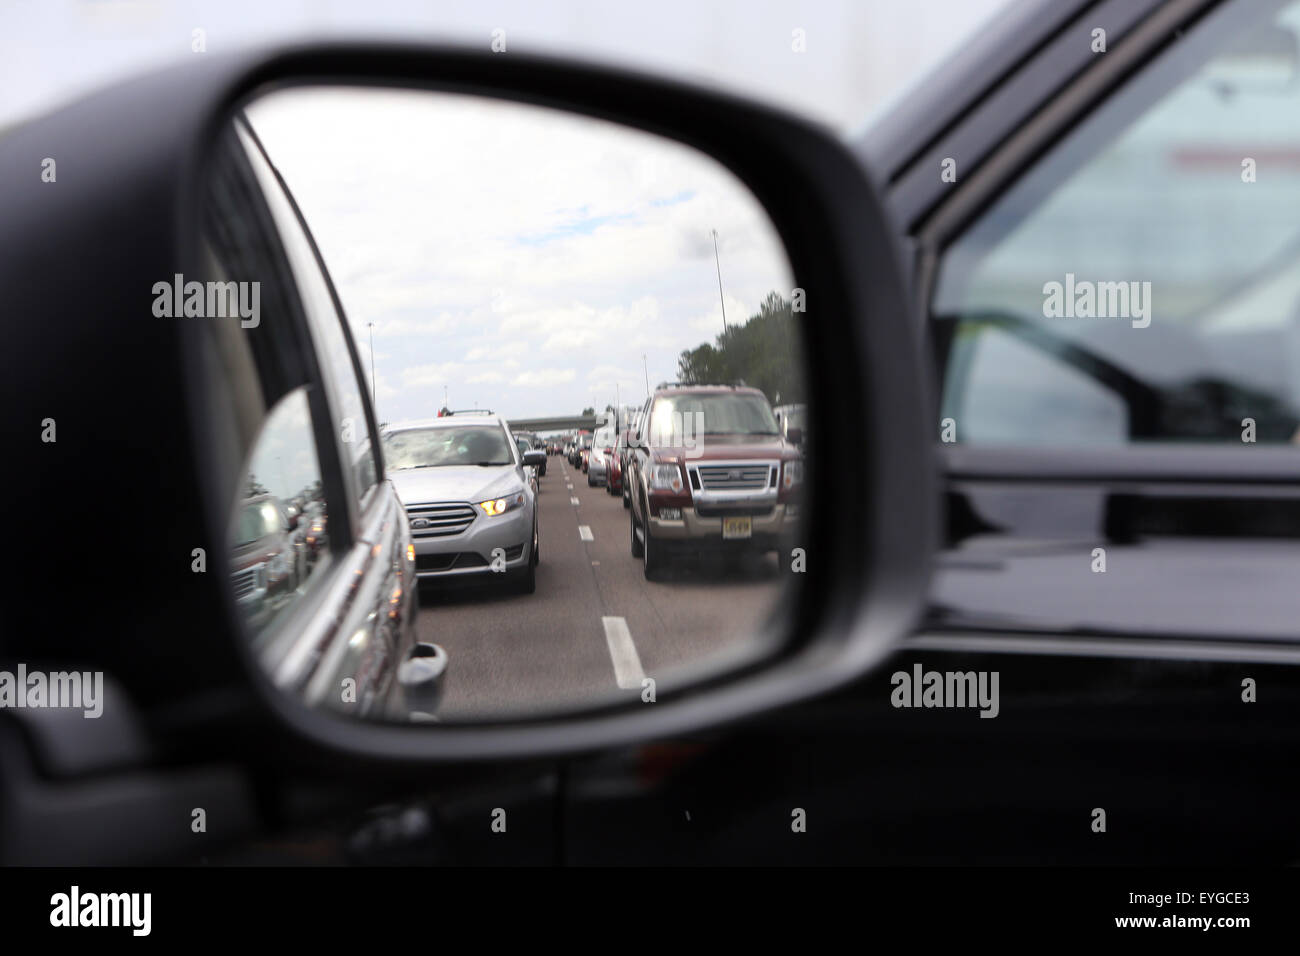 Lake City, United States, looking at the right side mirror of a car Stock Photo